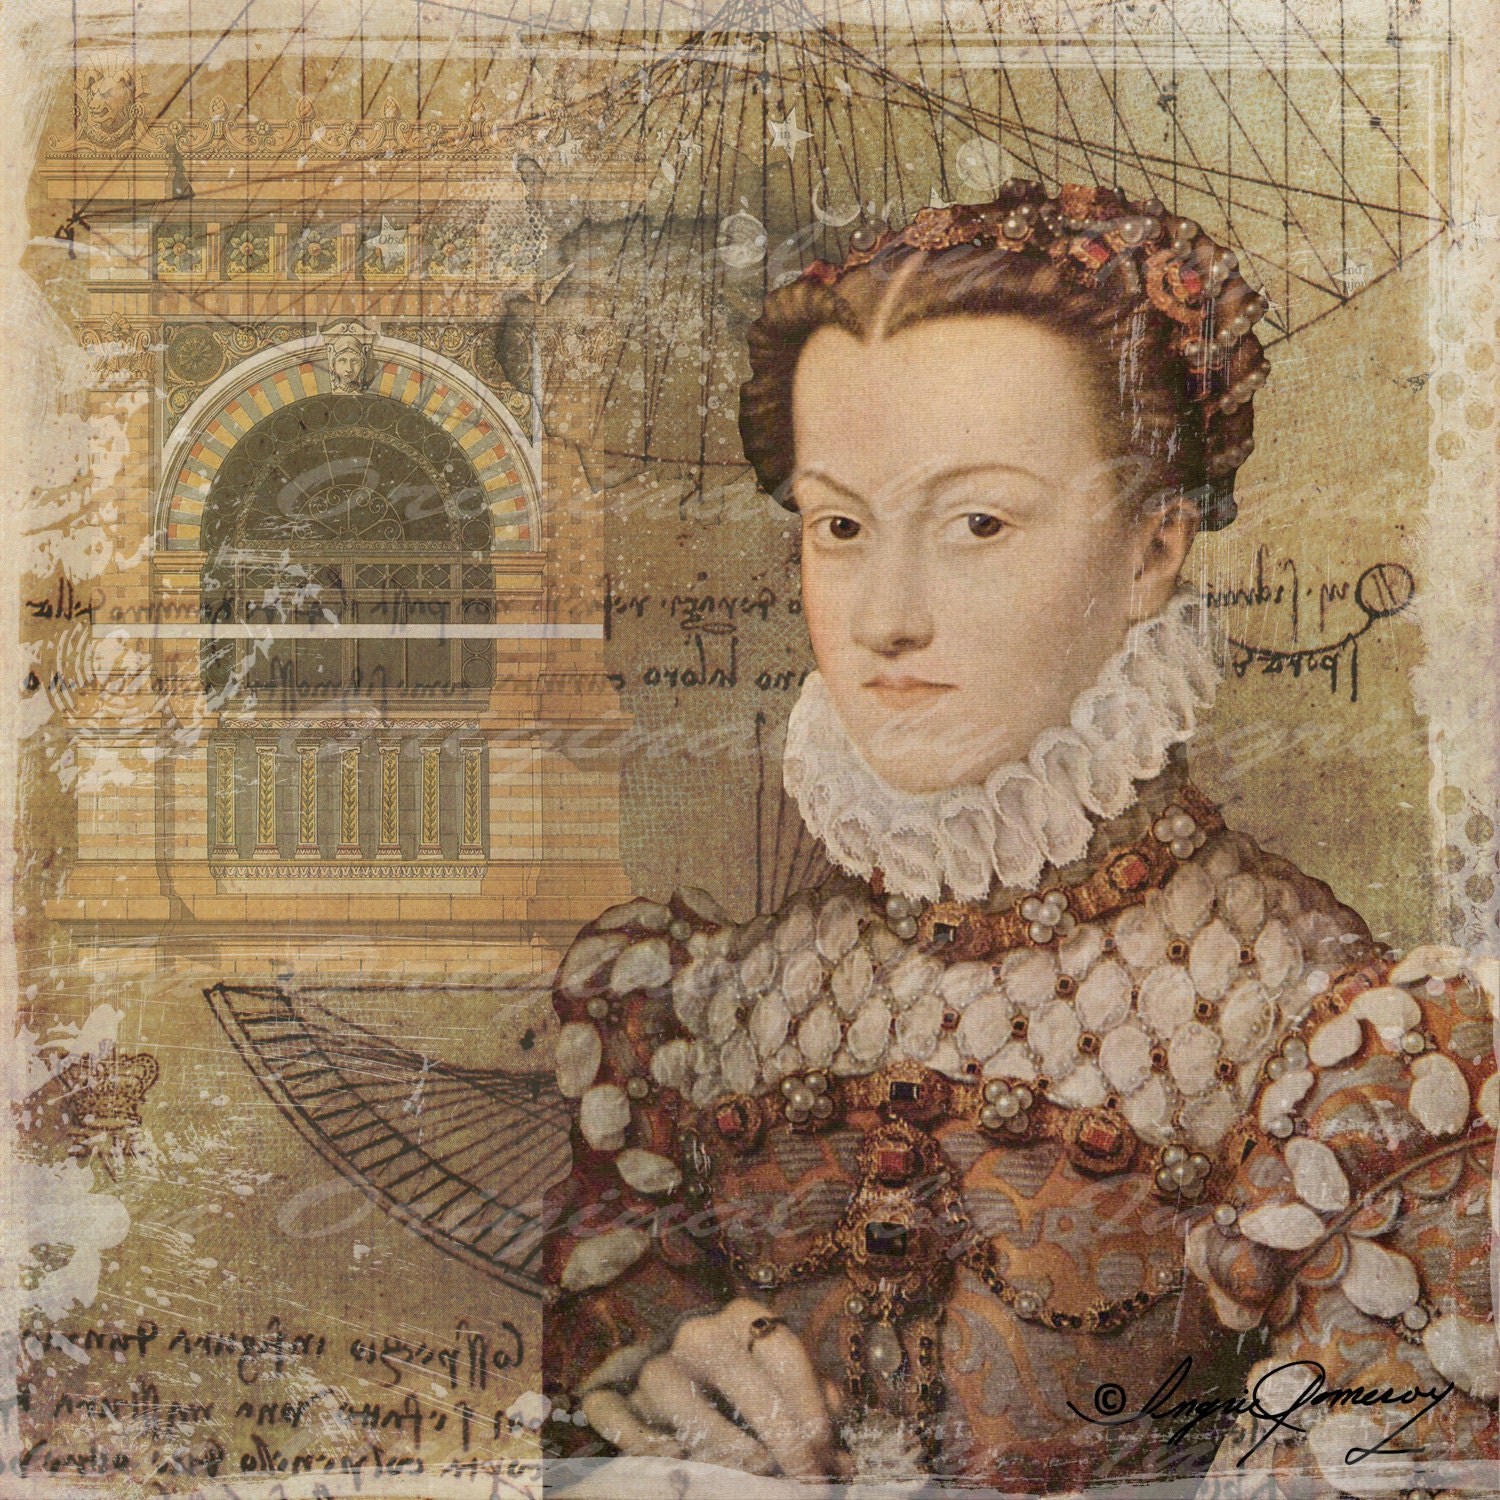 Renaissance Maiden Digital Collage Greeting Card (Suitable for Framing)